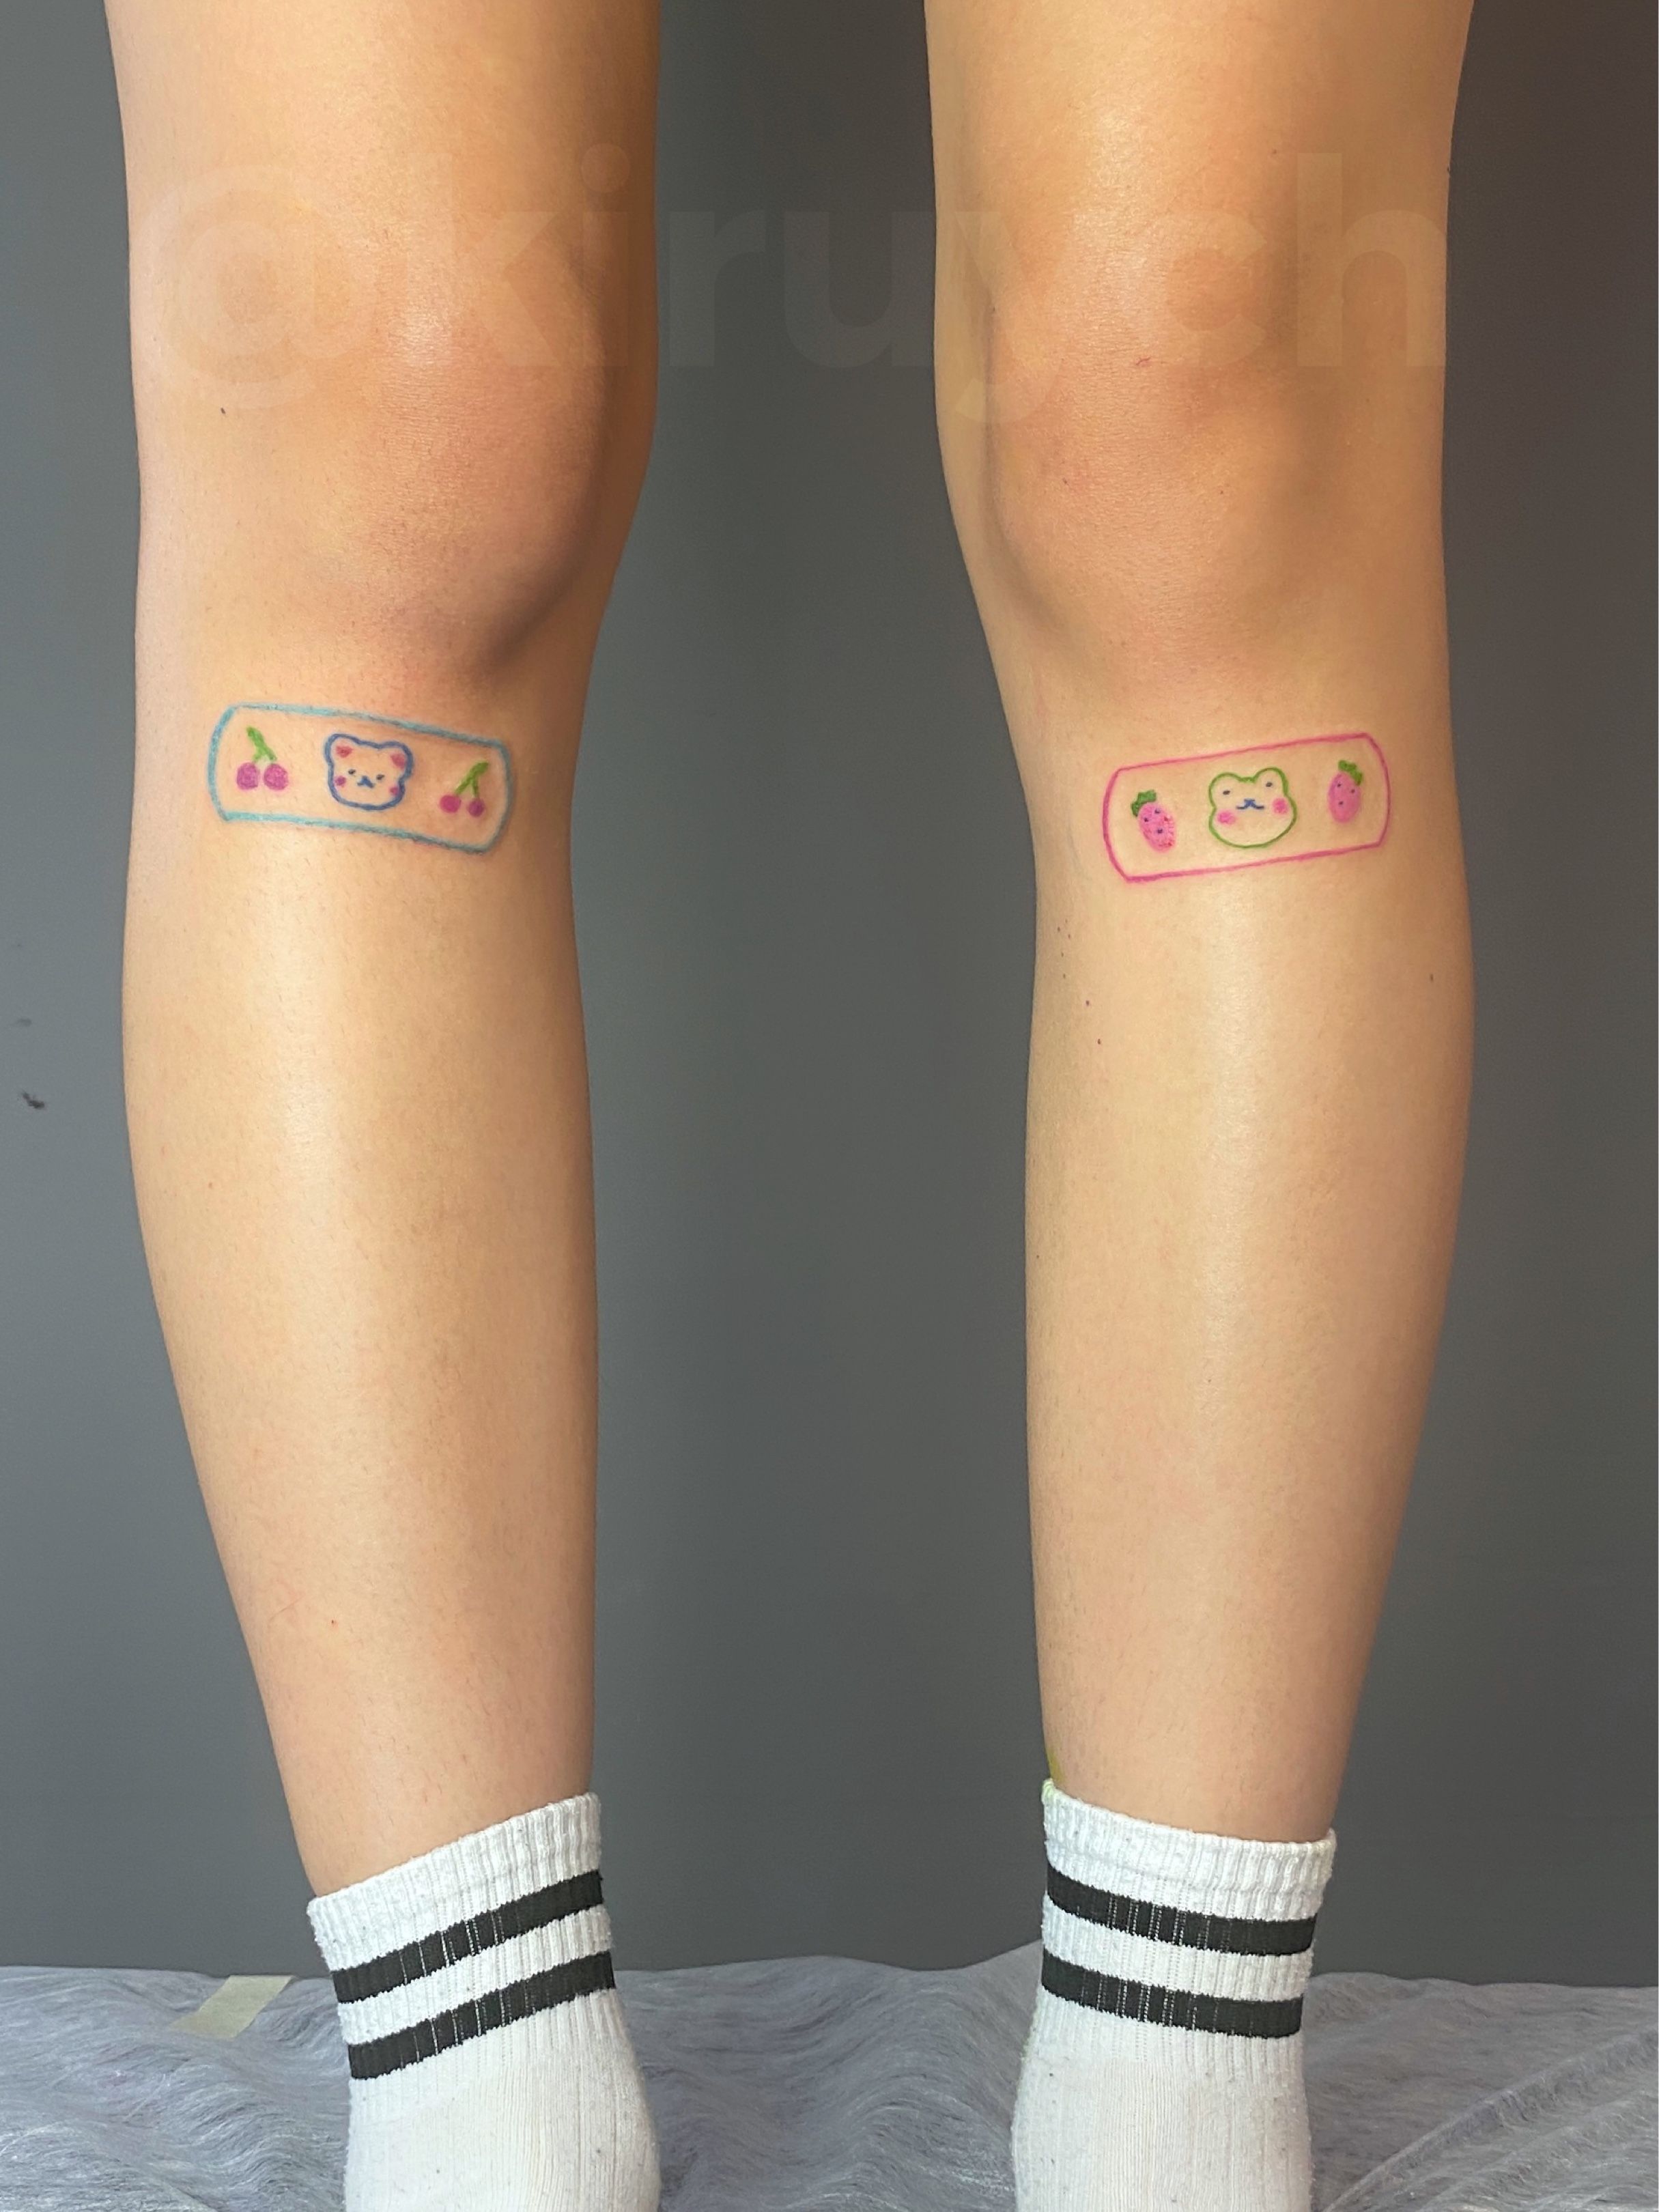 Band-Aid Temporary Tattoo Sticker Lasts 1-2 Weeks Waterproof and  Anti-Friction - AliExpress